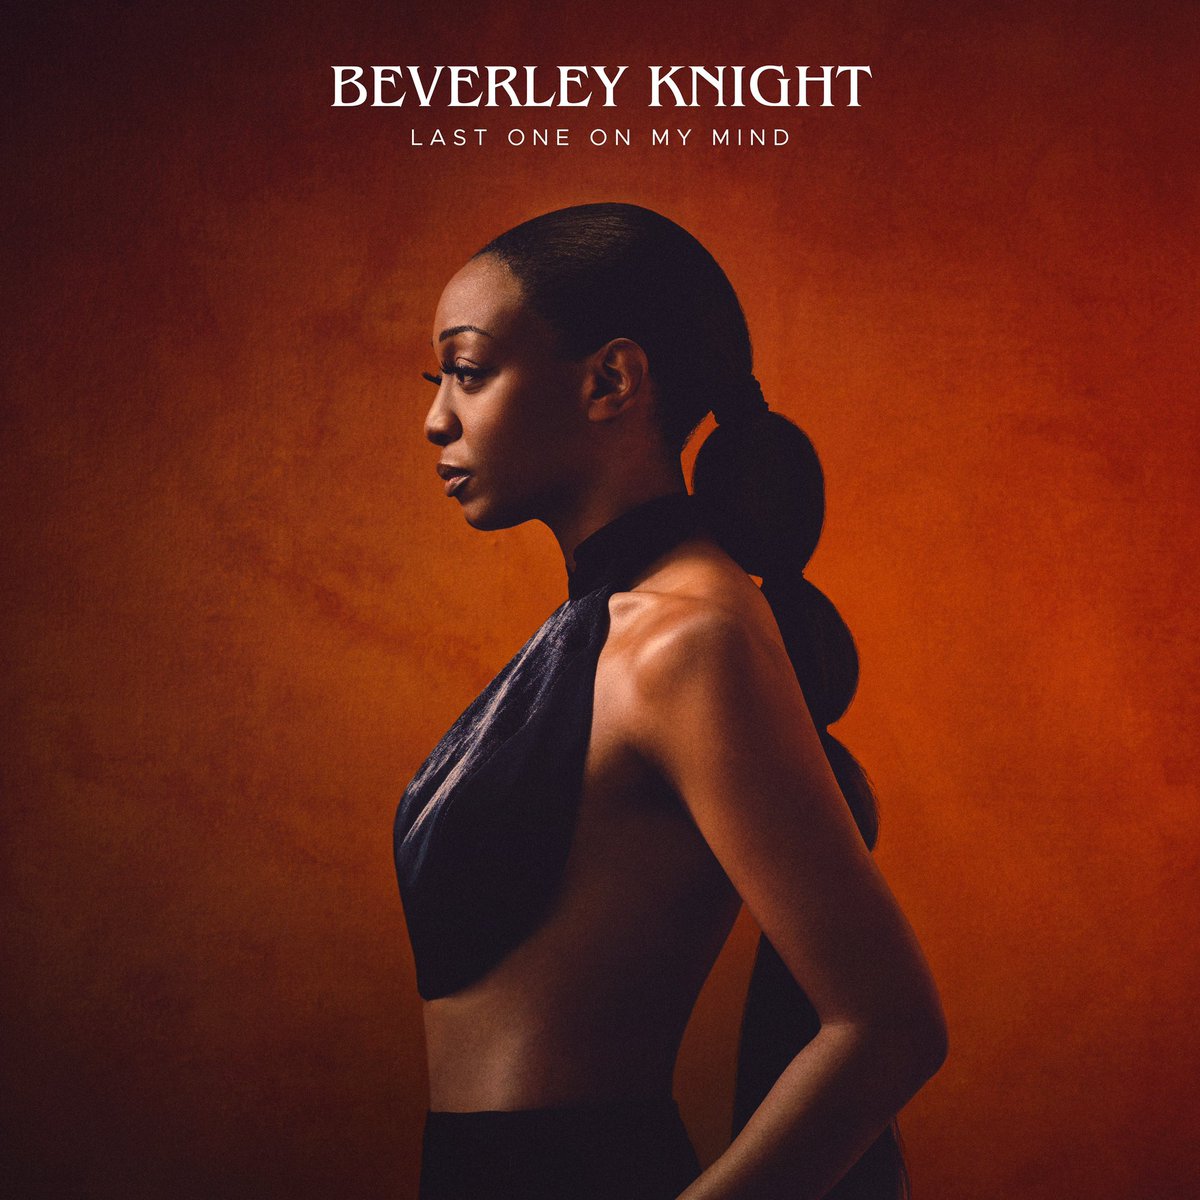 NEW RELEASE 🎵// @Beverleyknight is BACK! Her new single ‘Last One On My Mind’ is out this Friday 9th June! Pre-save now ➡️: tag8.lnk.to/BK_LOOMM